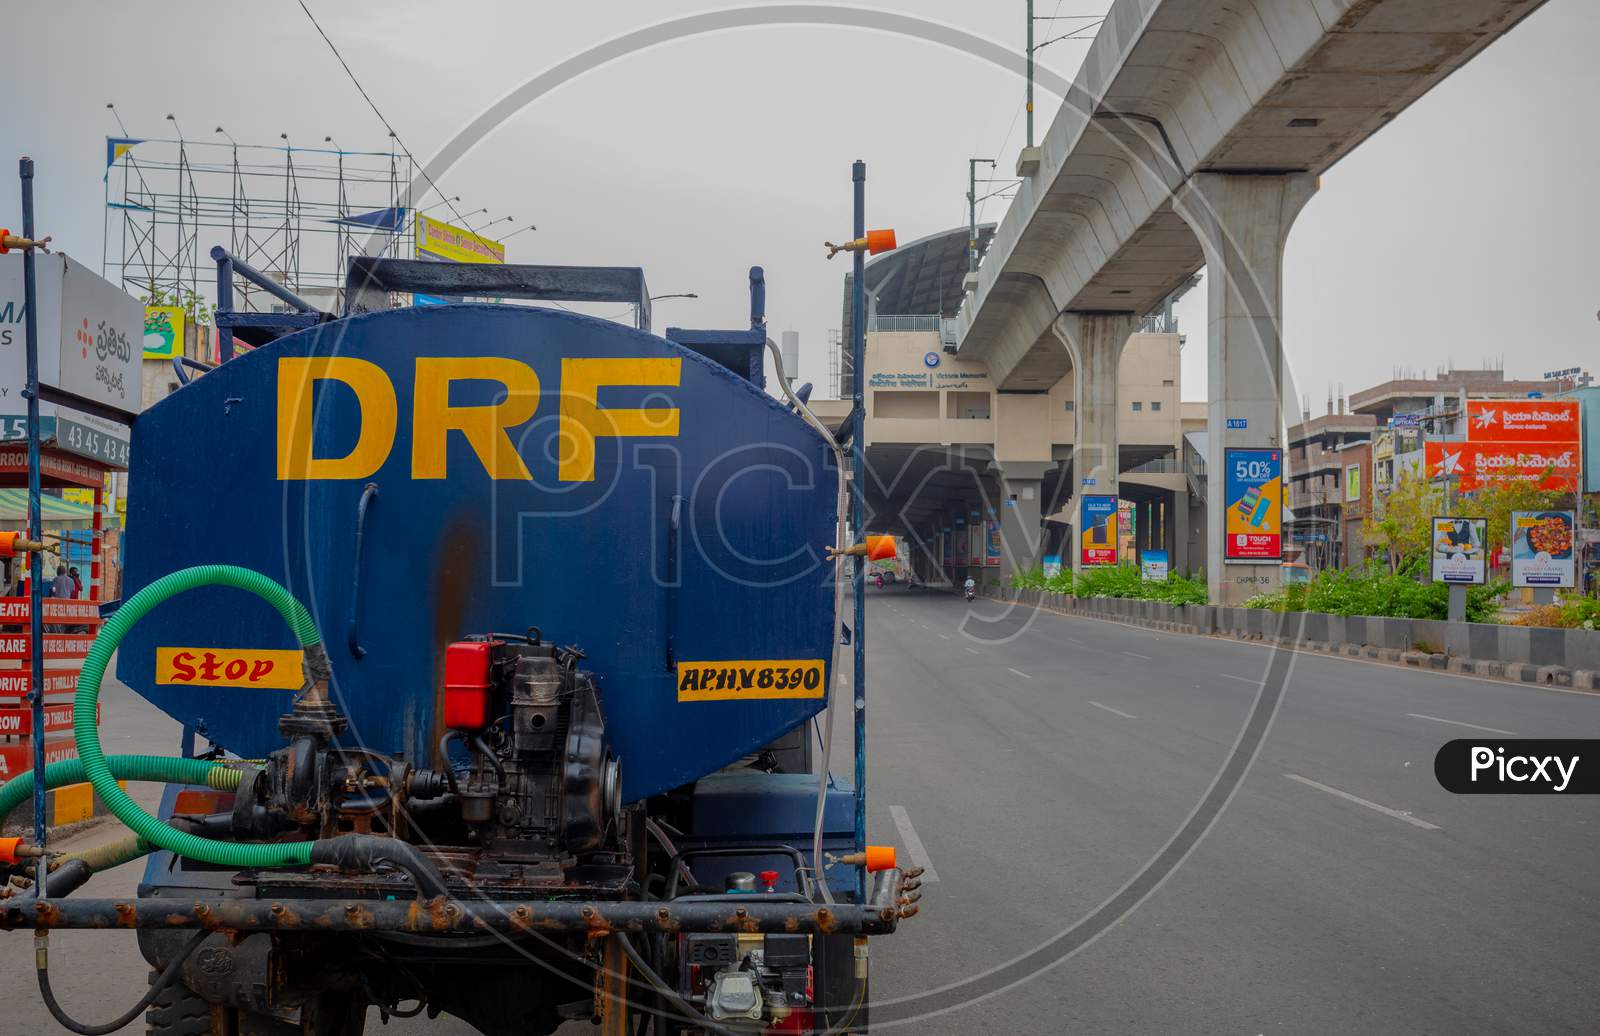 DRf Vehicle Under stand By during lockdown amid coronavirus or covid 19 outbreak in india